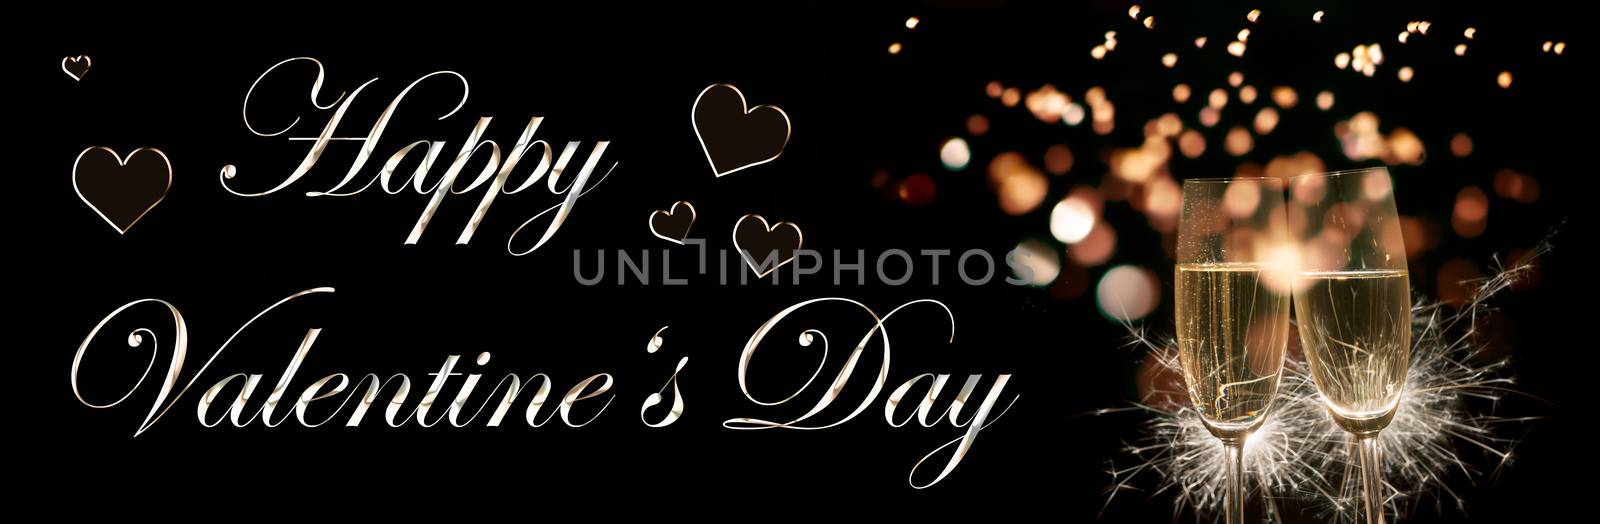 Image of two champagne glasses and text Happy Valentine's Day